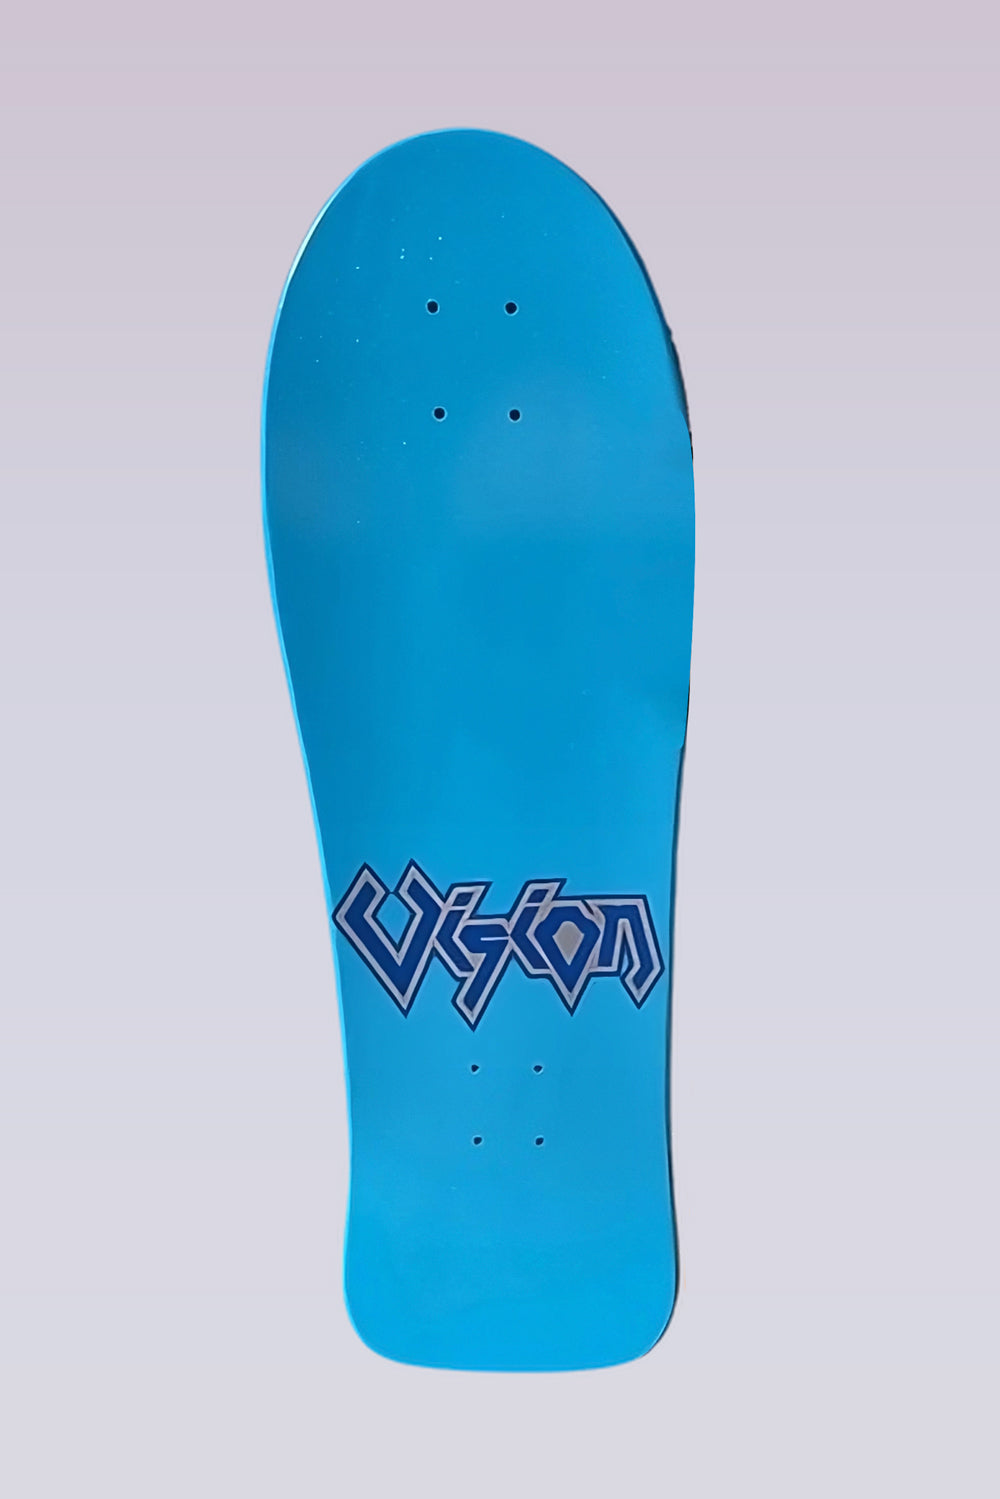 Limited Groholski Robot Deck-Special Pearl-Skateboard hall of fame-9.5"X29.5"- Blue Pearl